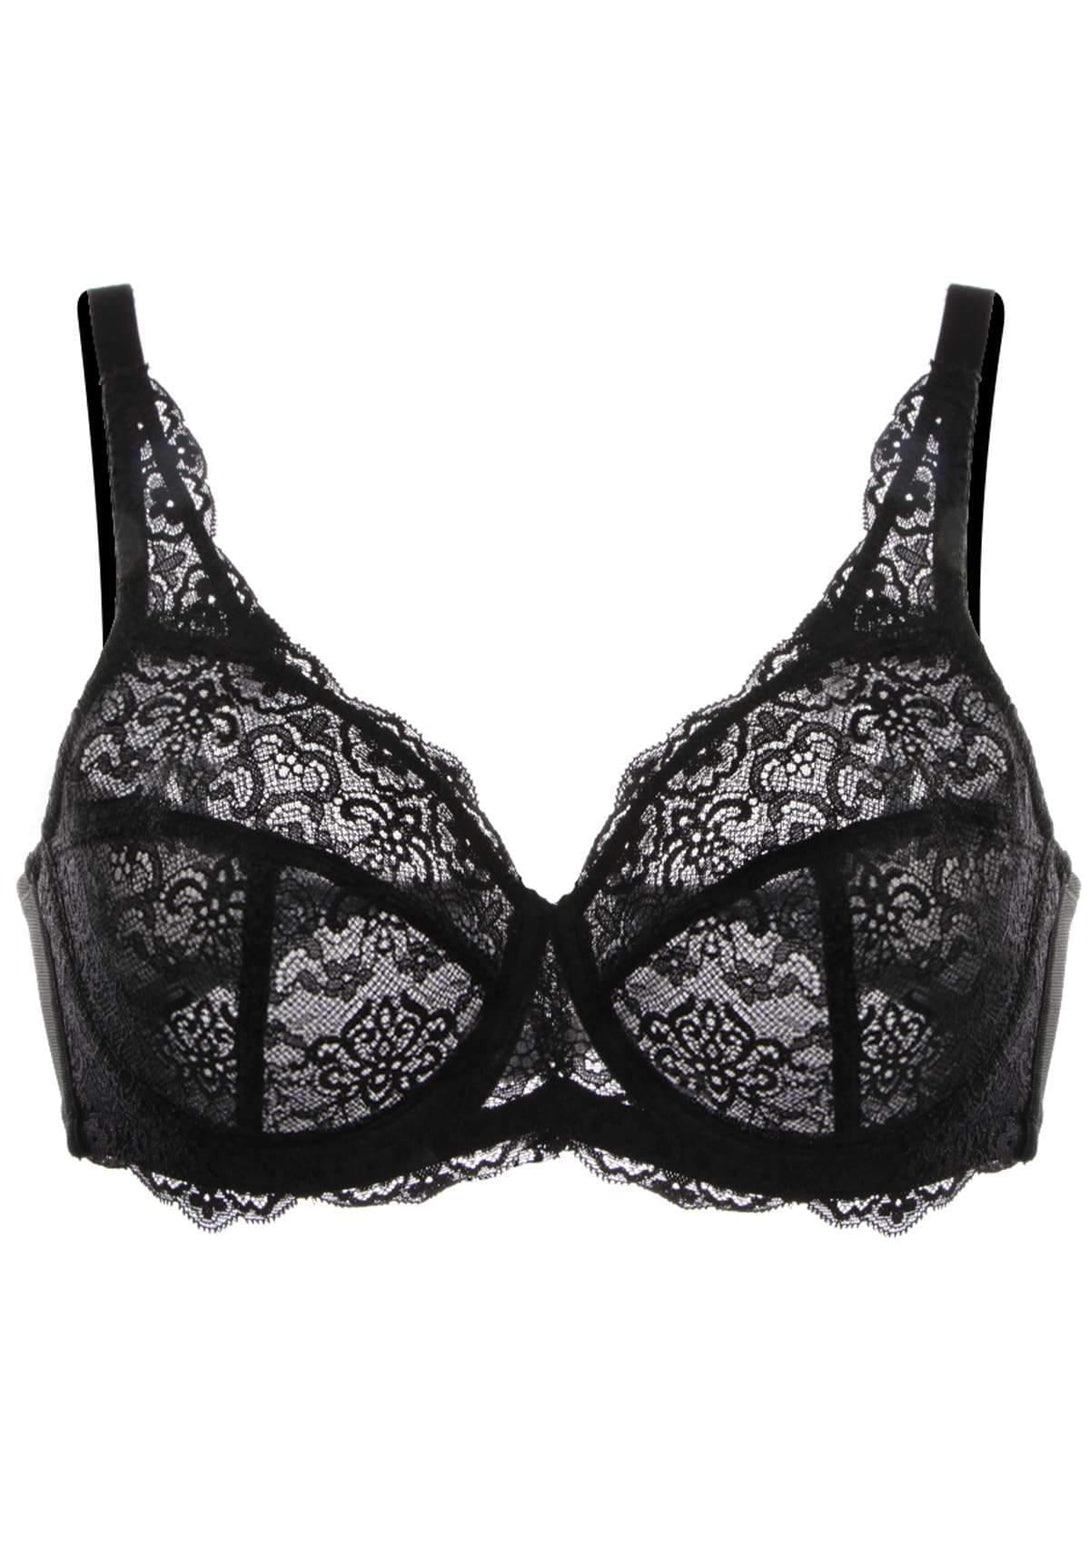 HSIA HSIA Black All-Over Floral Lace Bra